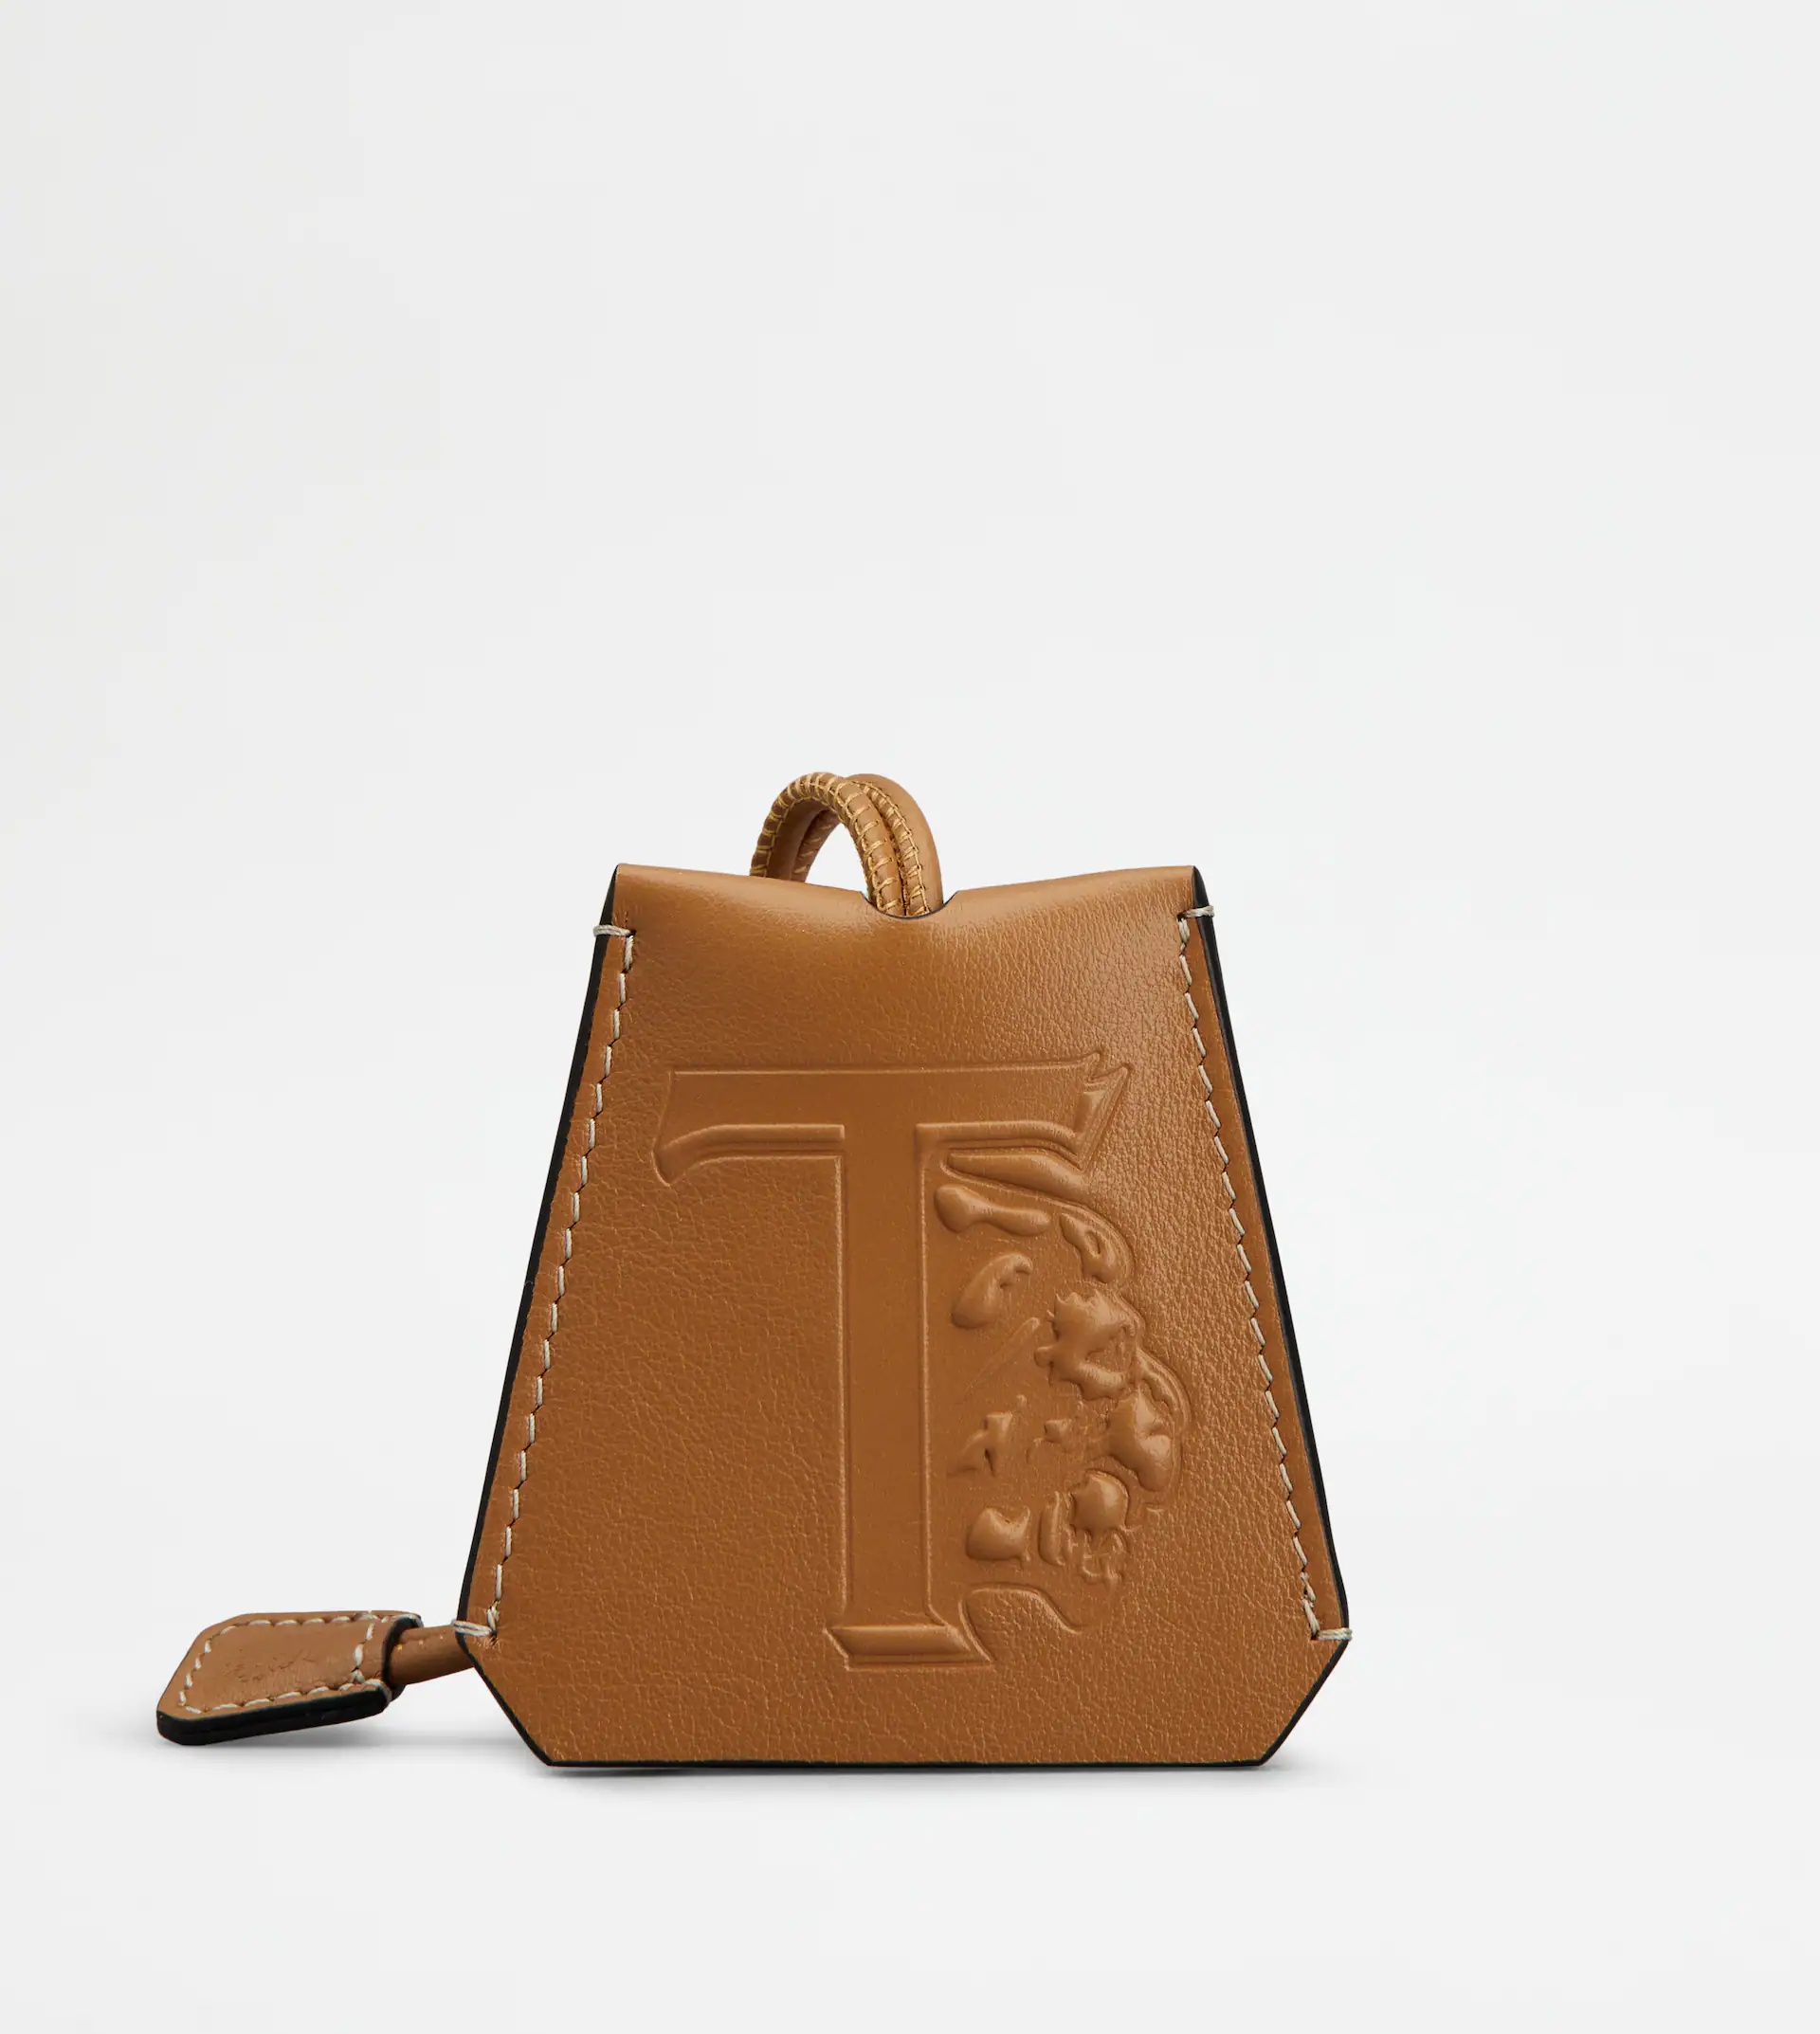 TOD'S NECK KEY HOLDER IN LEATHER - BROWN - 1